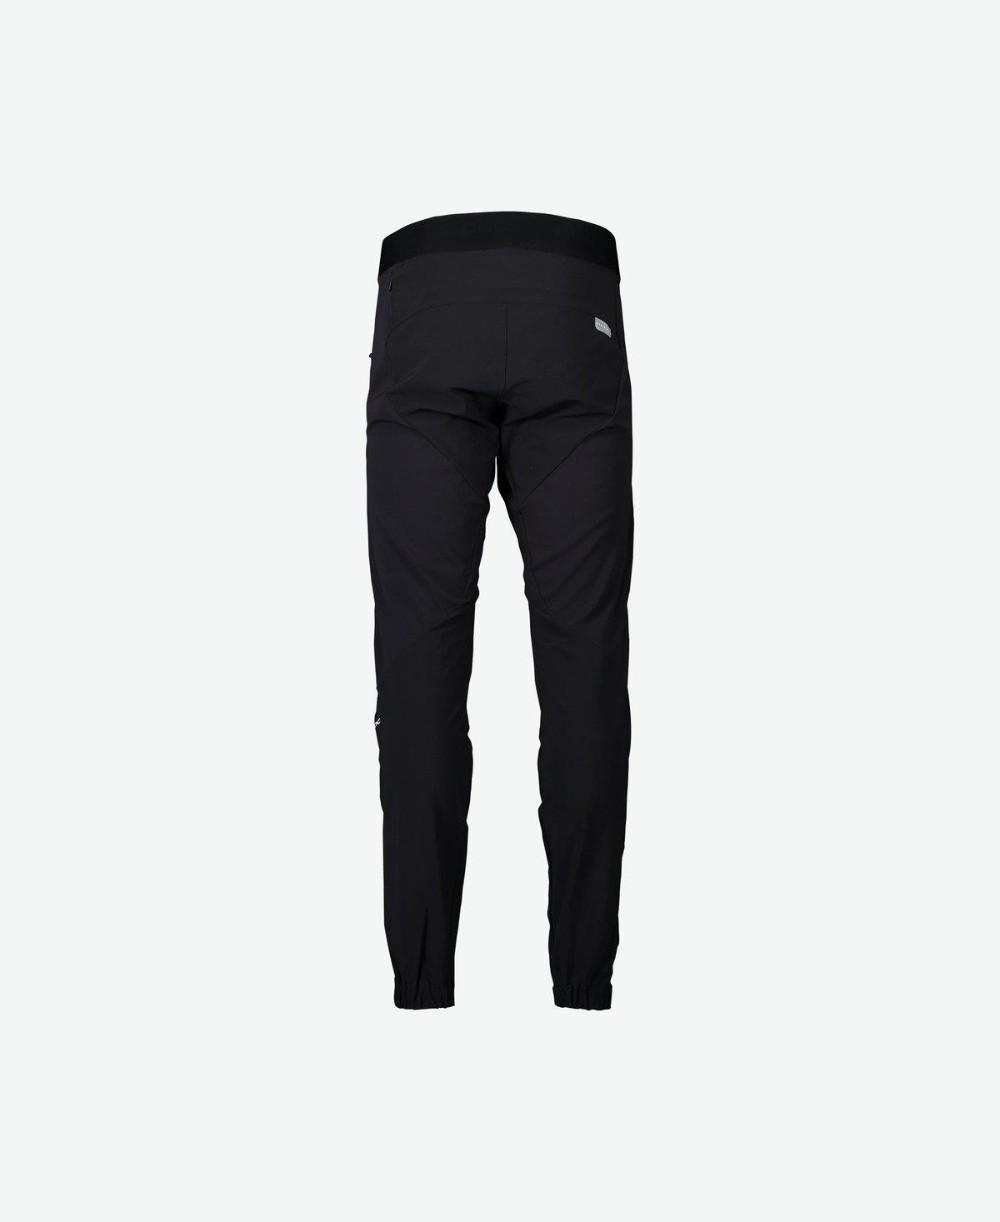 Rhythm Resistance Cycling Trousers image 1